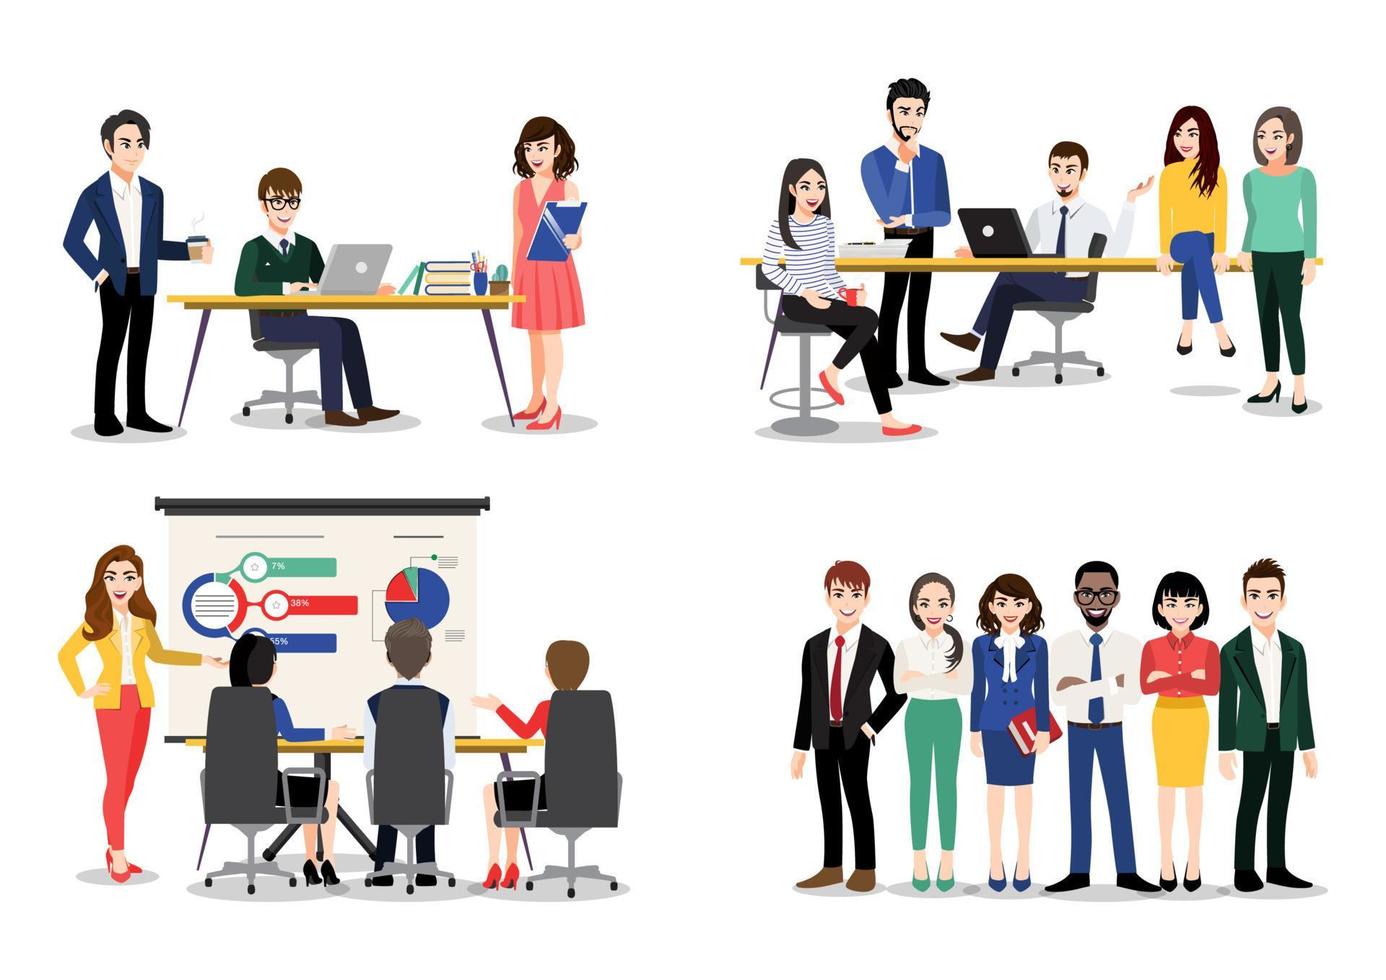 Office worker set. Bundle of men and women taking part in business meeting, negotiation, brainstorming, talking to each other. Colorful vector illustration in flat cartoon style